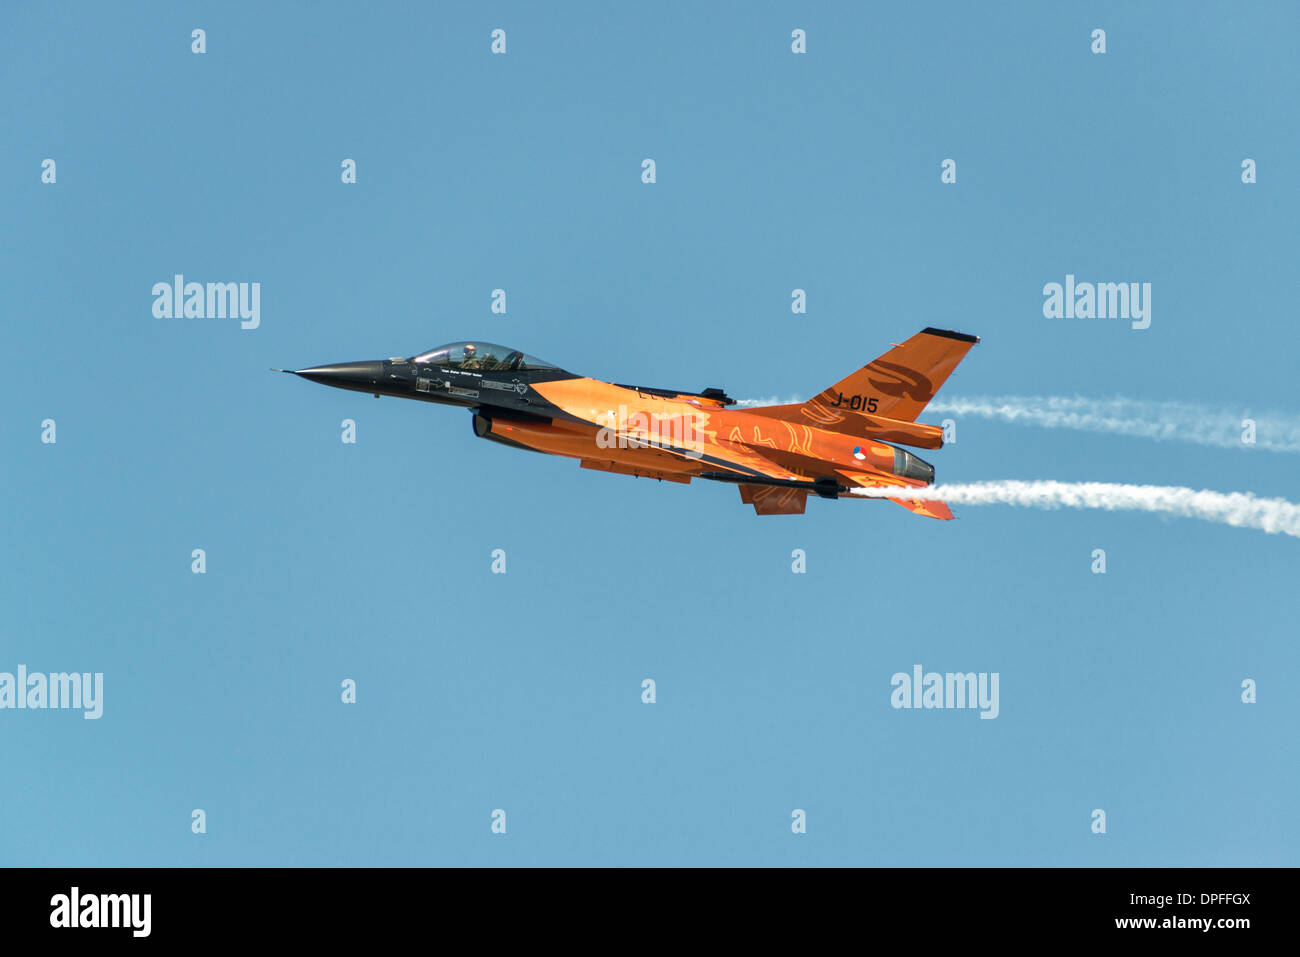 F-16 fighter jet of the Royal Netherlands Air Force demonstration team in it's striking orange livery demonstrates at RIAT Stock Photo